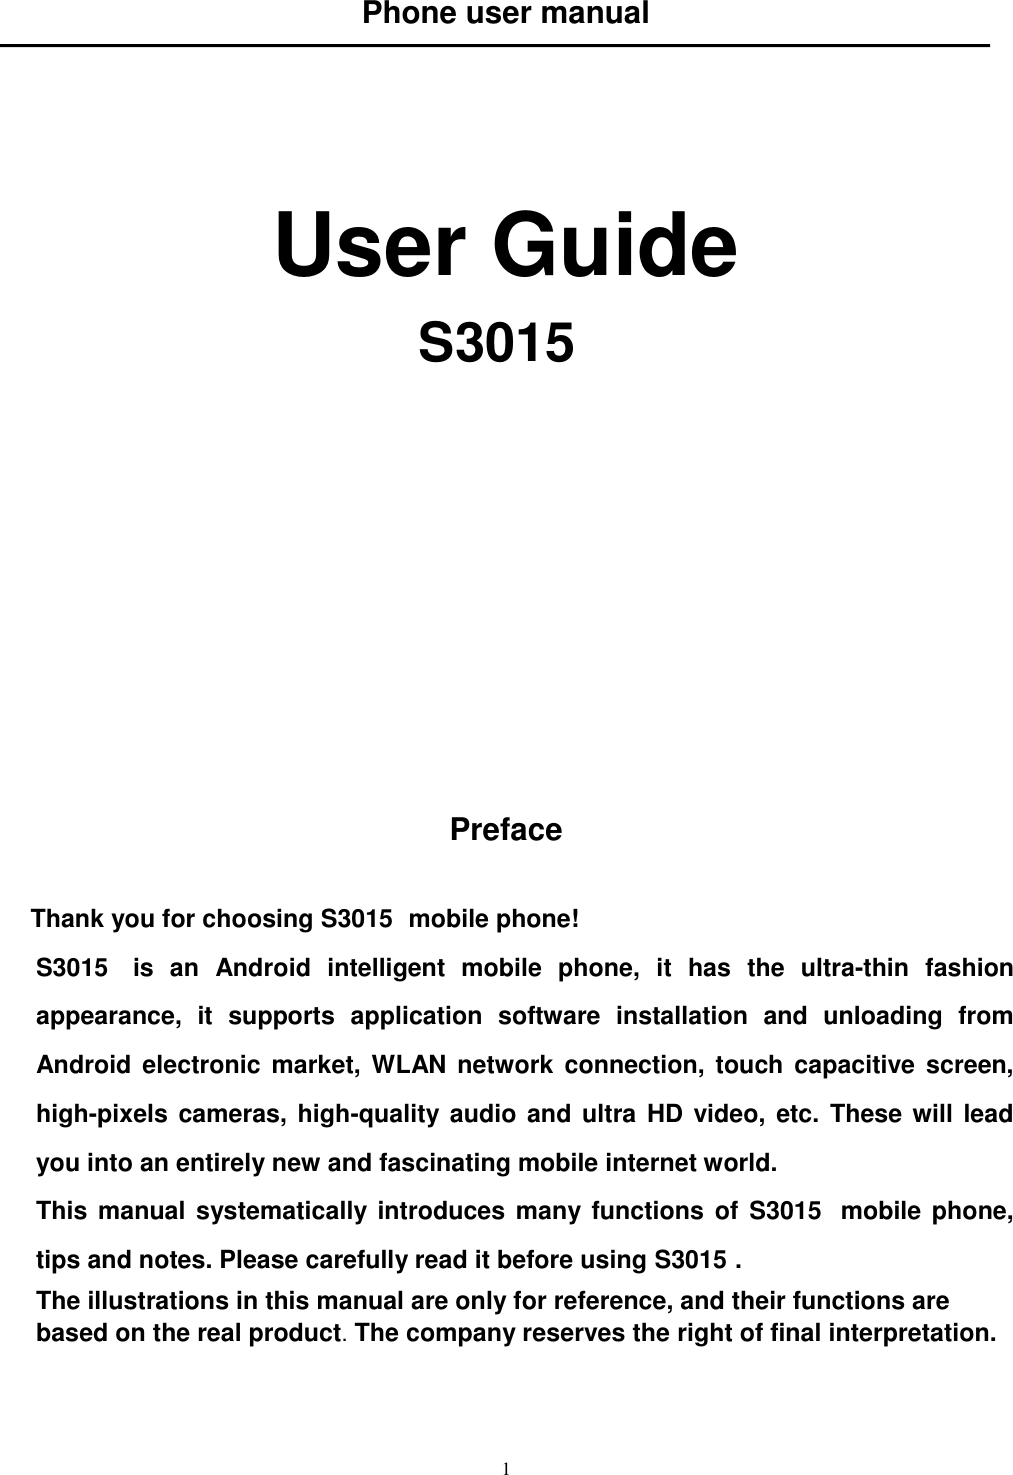   1 Phone user manual      User Guide S3015               Preface  Thank you for choosing S3015  mobile phone! S3015   is  an  Android  intelligent  mobile  phone,  it  has  the  ultra-thin  fashion appearance,  it  supports  application  software  installation  and  unloading  from Android  electronic  market, WLAN network connection,  touch  capacitive  screen, high-pixels cameras, high-quality audio and ultra HD video, etc. These will lead you into an entirely new and fascinating mobile internet world. This manual systematically introduces many functions  of  S3015  mobile phone, tips and notes. Please carefully read it before using S3015 .   The illustrations in this manual are only for reference, and their functions are based on the real product. The company reserves the right of final interpretation.    